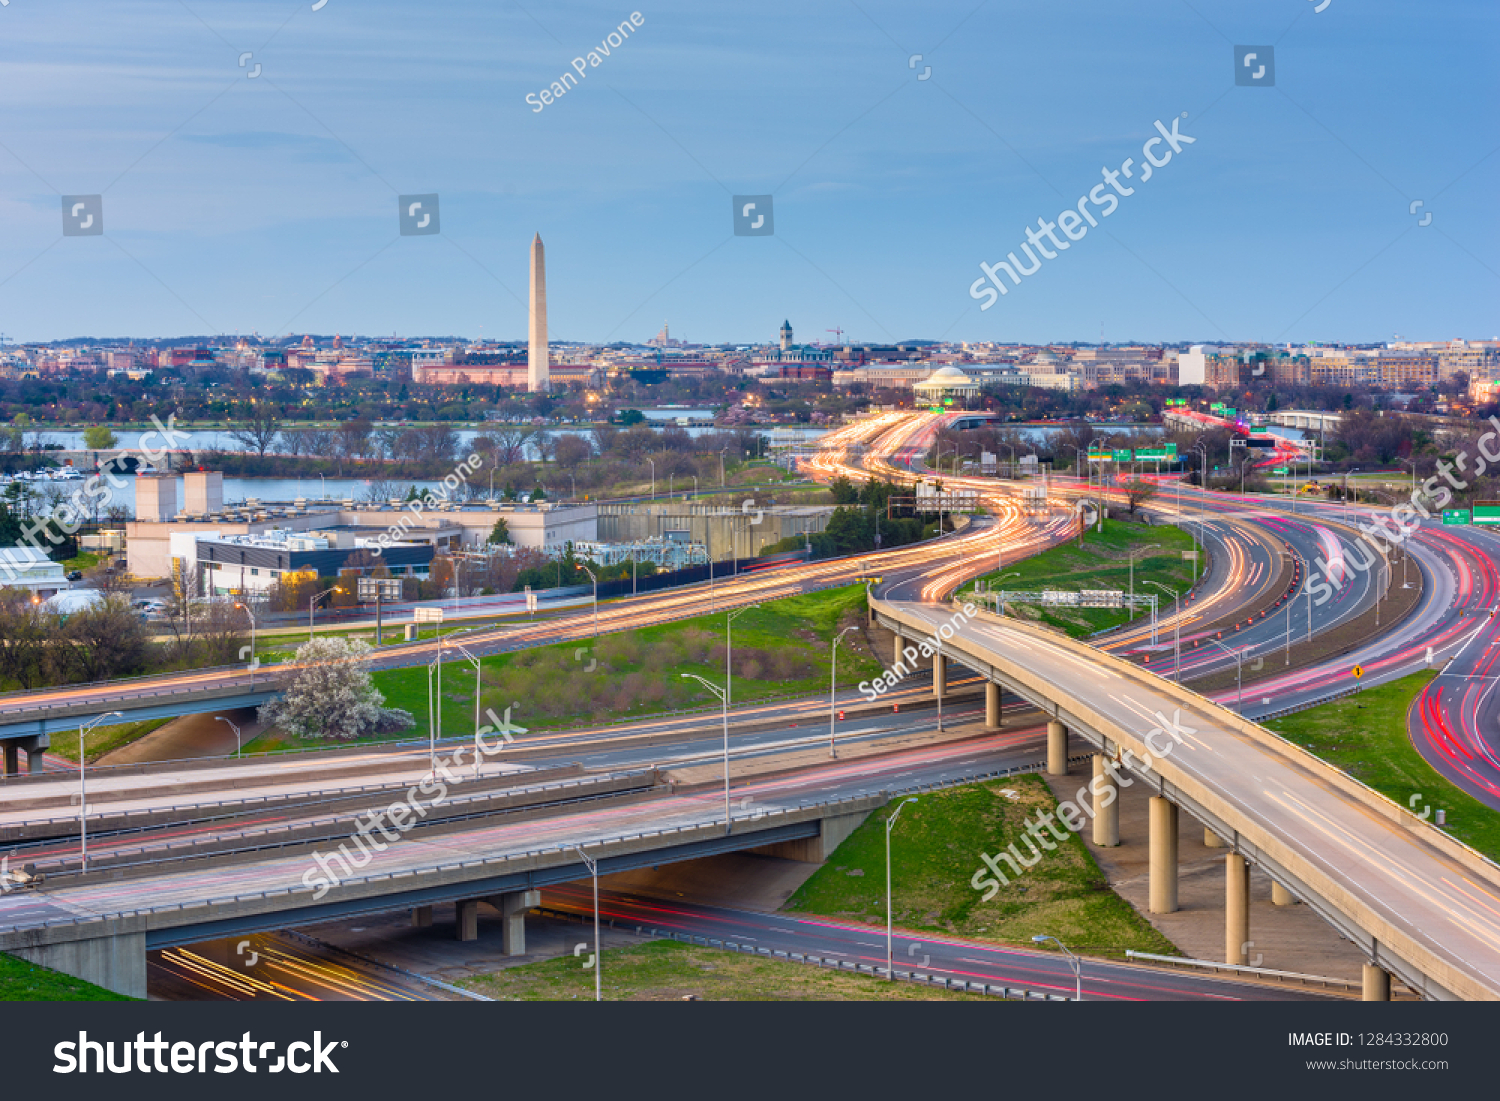 Washington, D.C. skyline with highways and monuments.  #1284332800